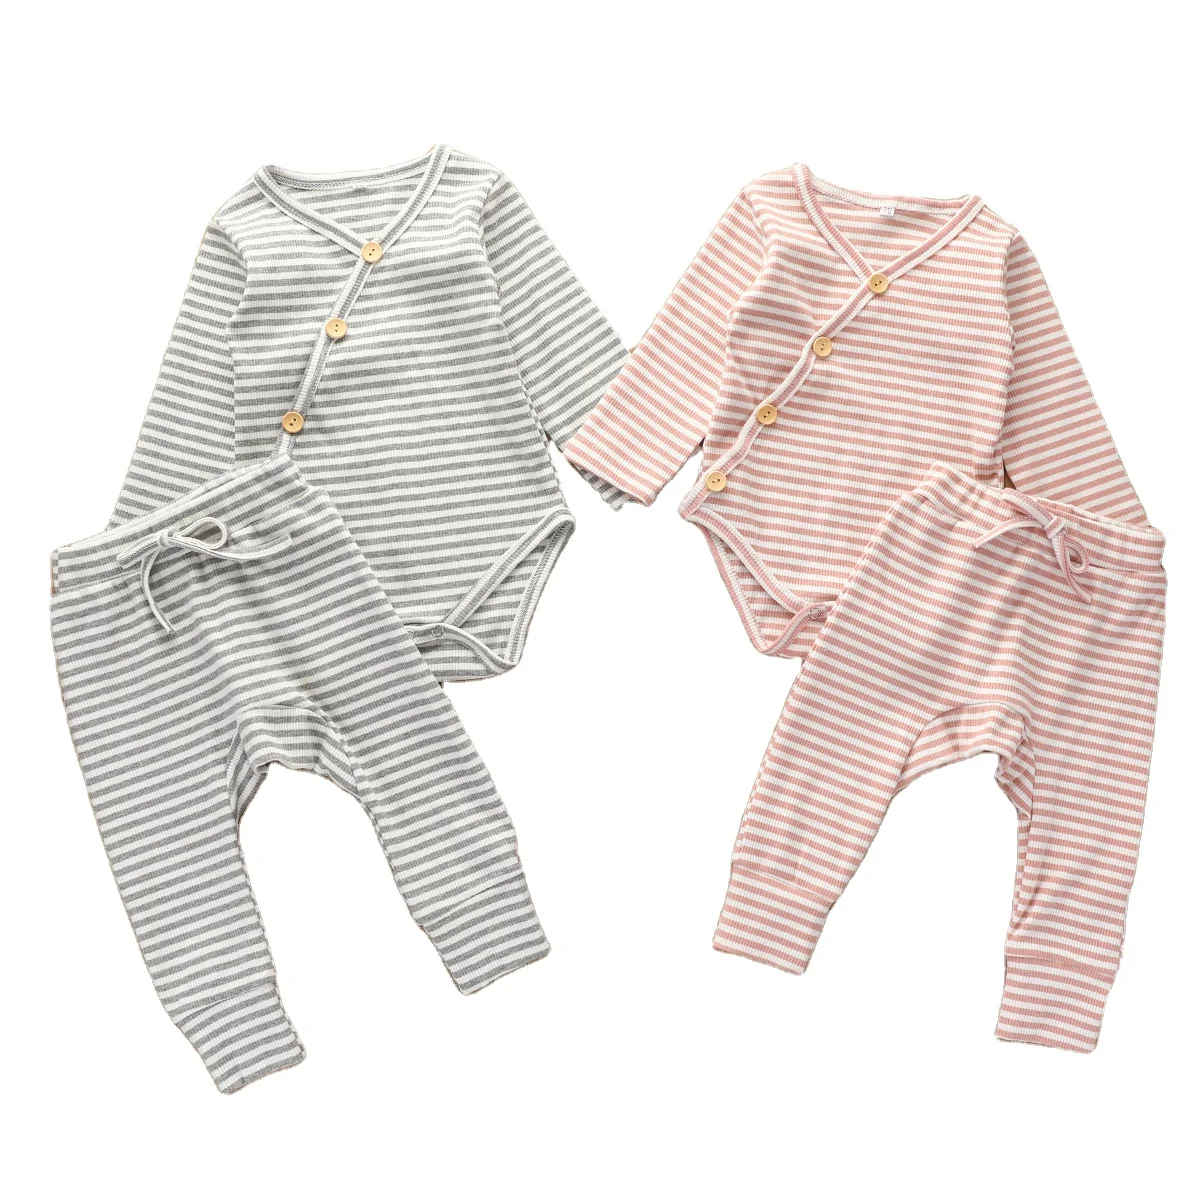 

Toddler Girls Clothes Ribbed Cotton Kimono Striped Romper Jogger Pant Outfit Fall Baby Clothing Sets, Photo showed and customized color